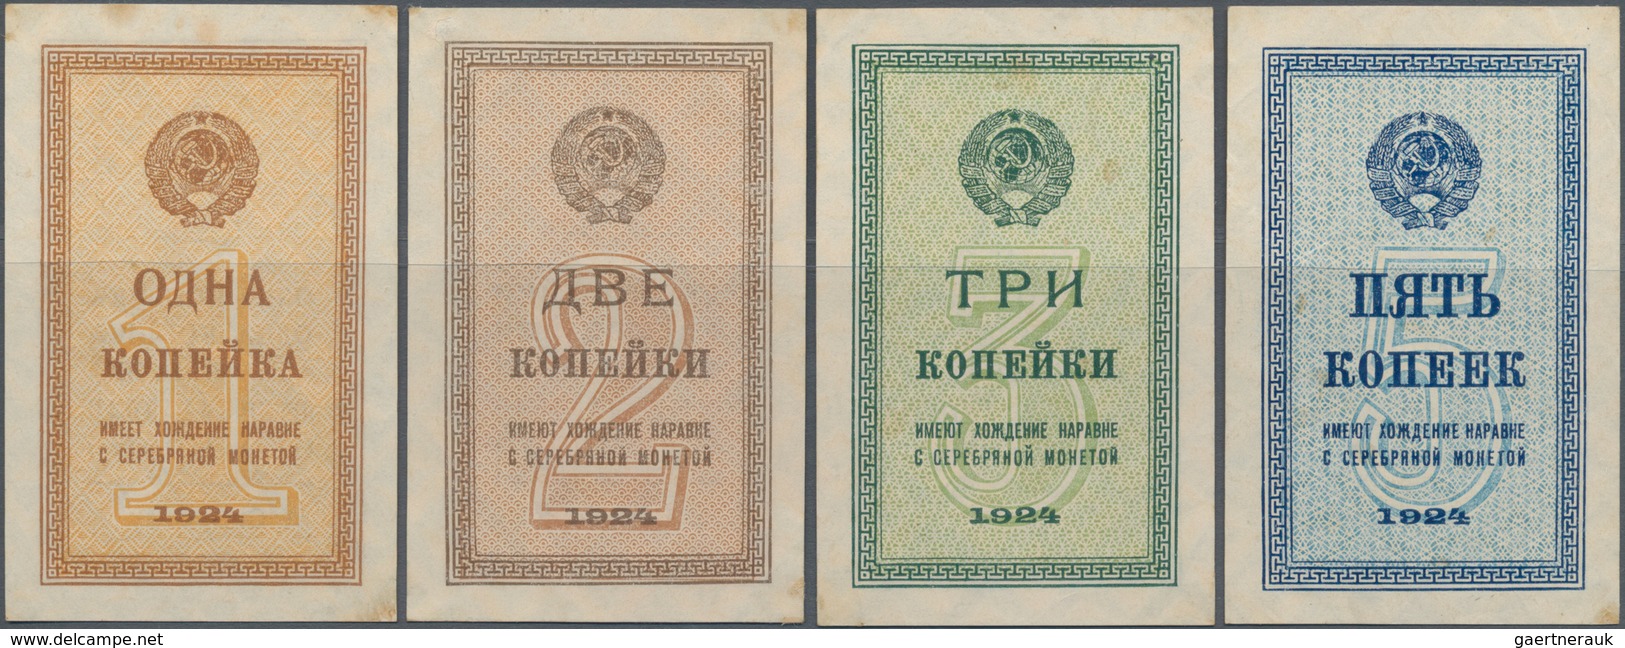 Russia / Russland: 1924 Small Change Kopek Notes Set With 1, 2, 3 And 5 Kopeks 1924, P.191-194, All - Russland